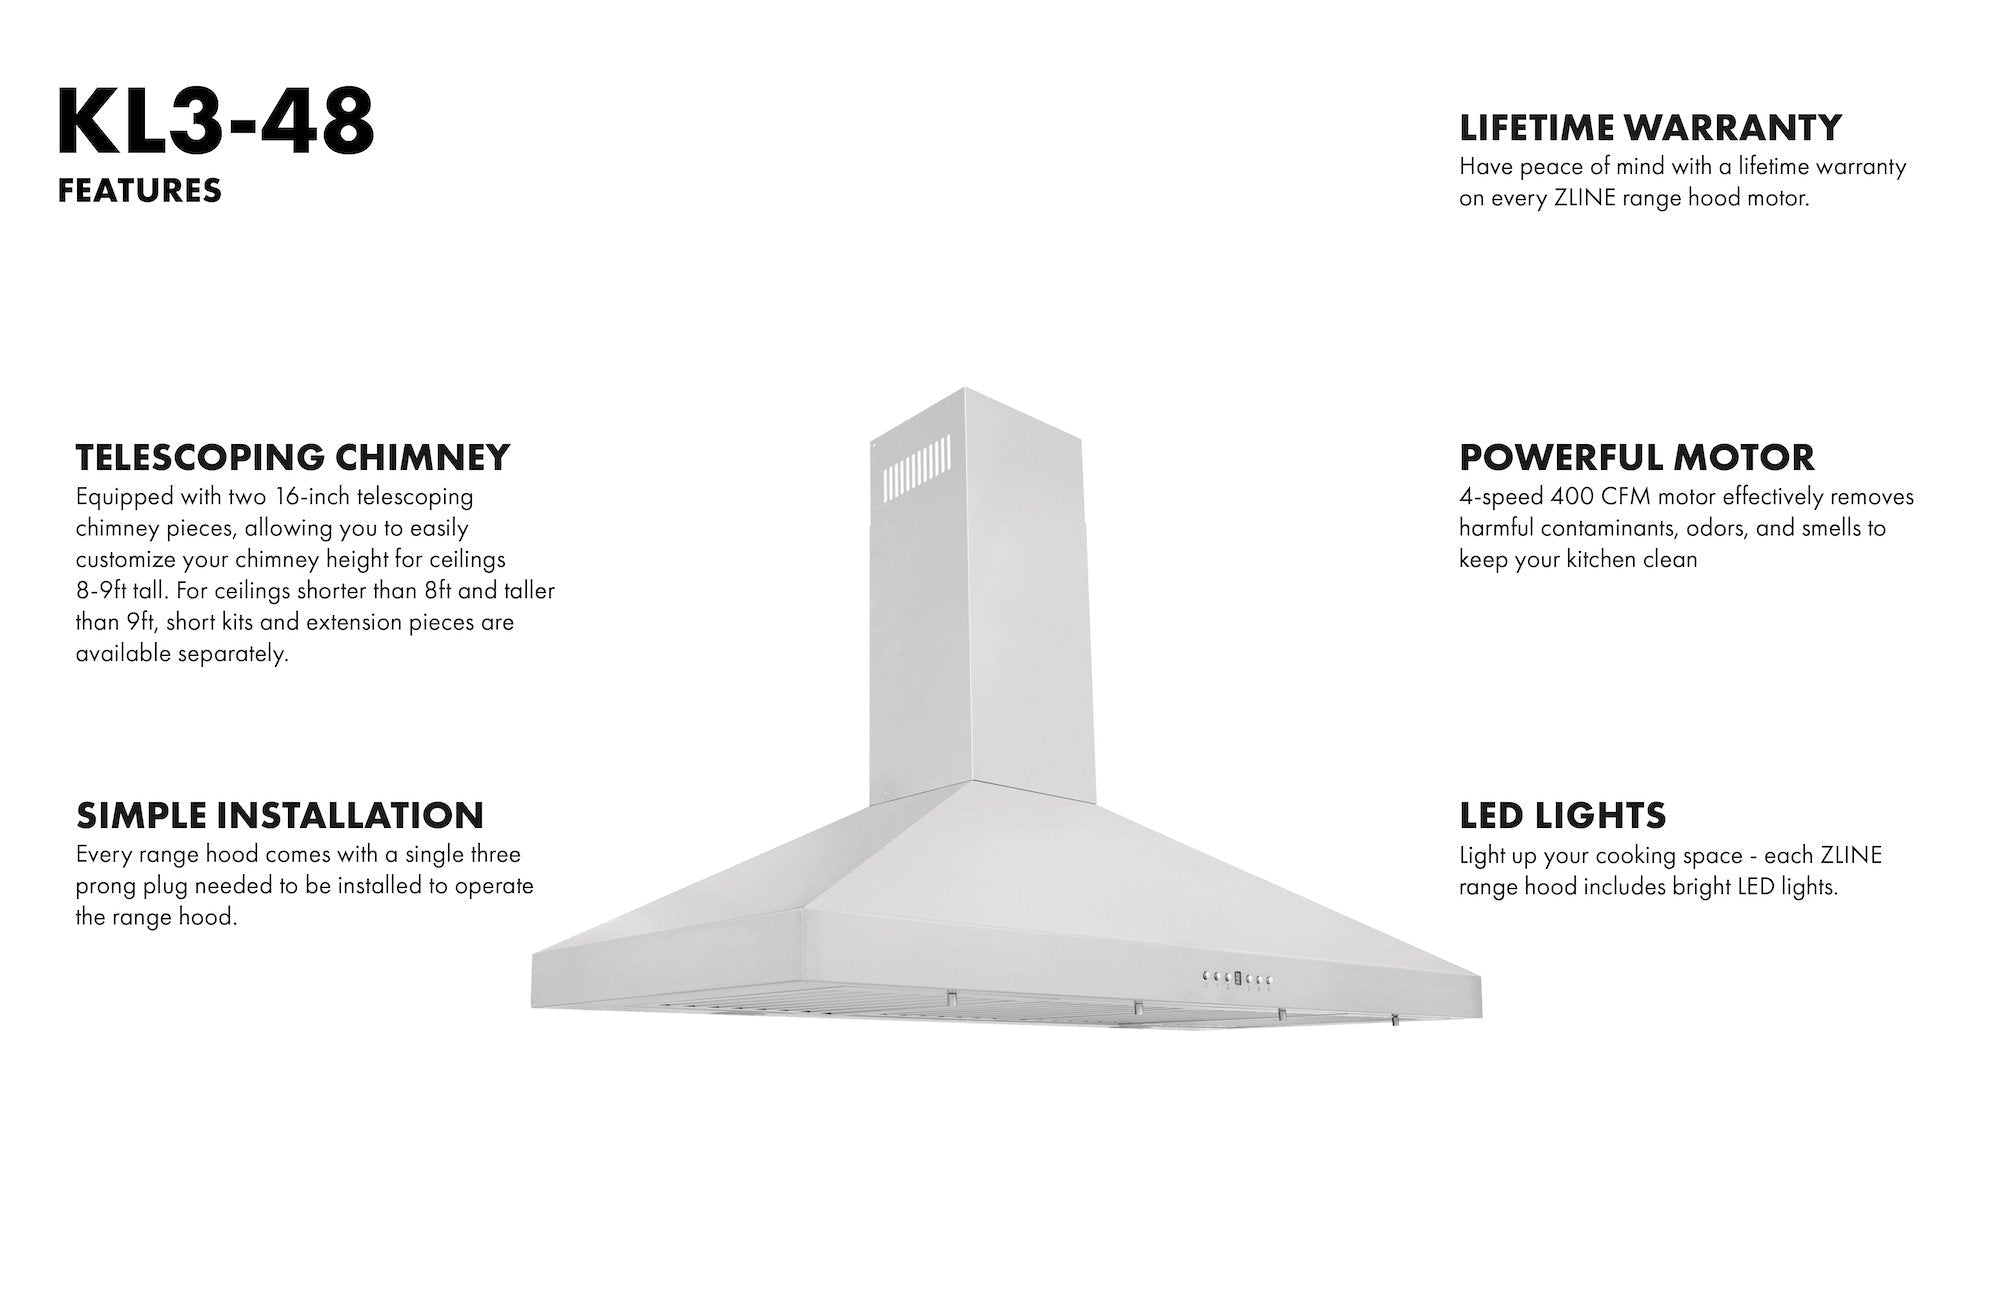 KL3-48 features lifetime warranty, LED lights, telescoping chimney, simple installation, and powerful motor.